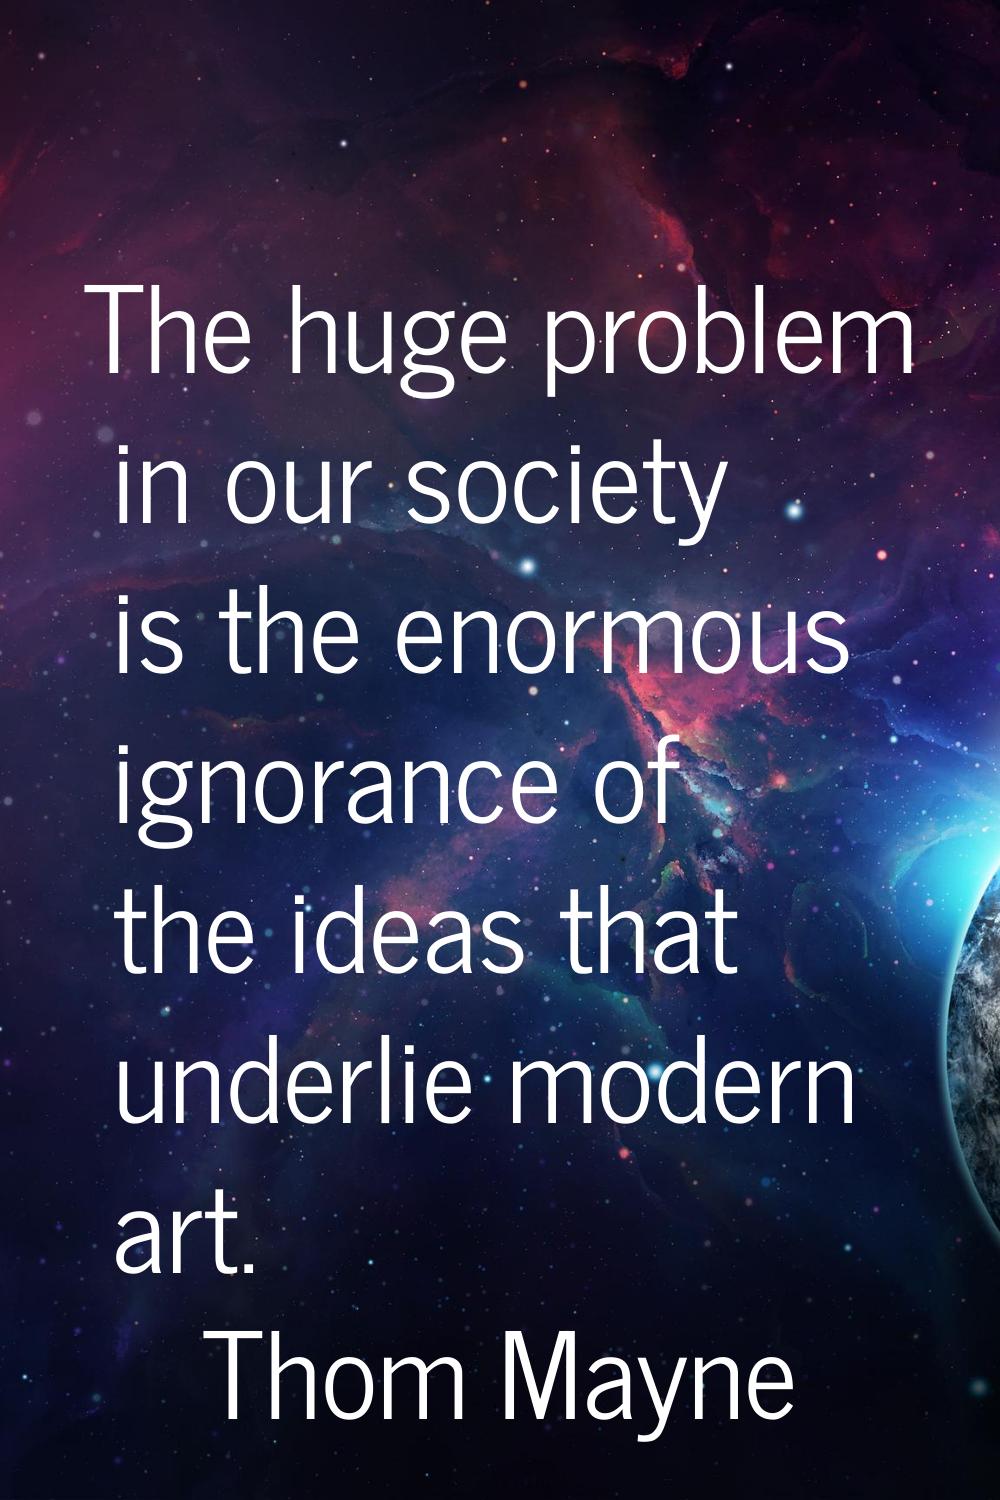 The huge problem in our society is the enormous ignorance of the ideas that underlie modern art.